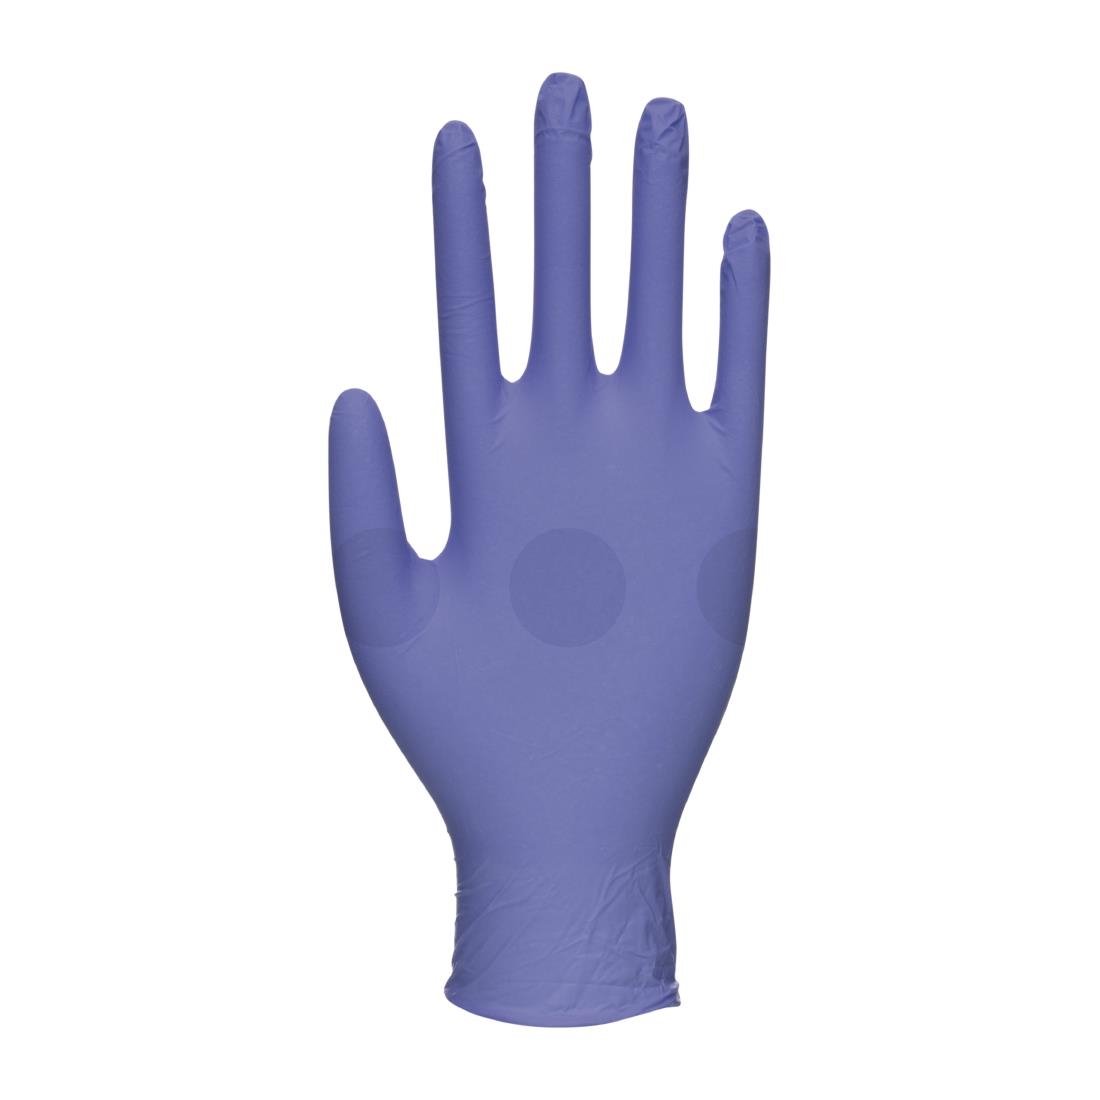 FW844-XL Biotouch Single Use Glove Violet Blue Nitrile Powder Free Size XL (Pack of 100)